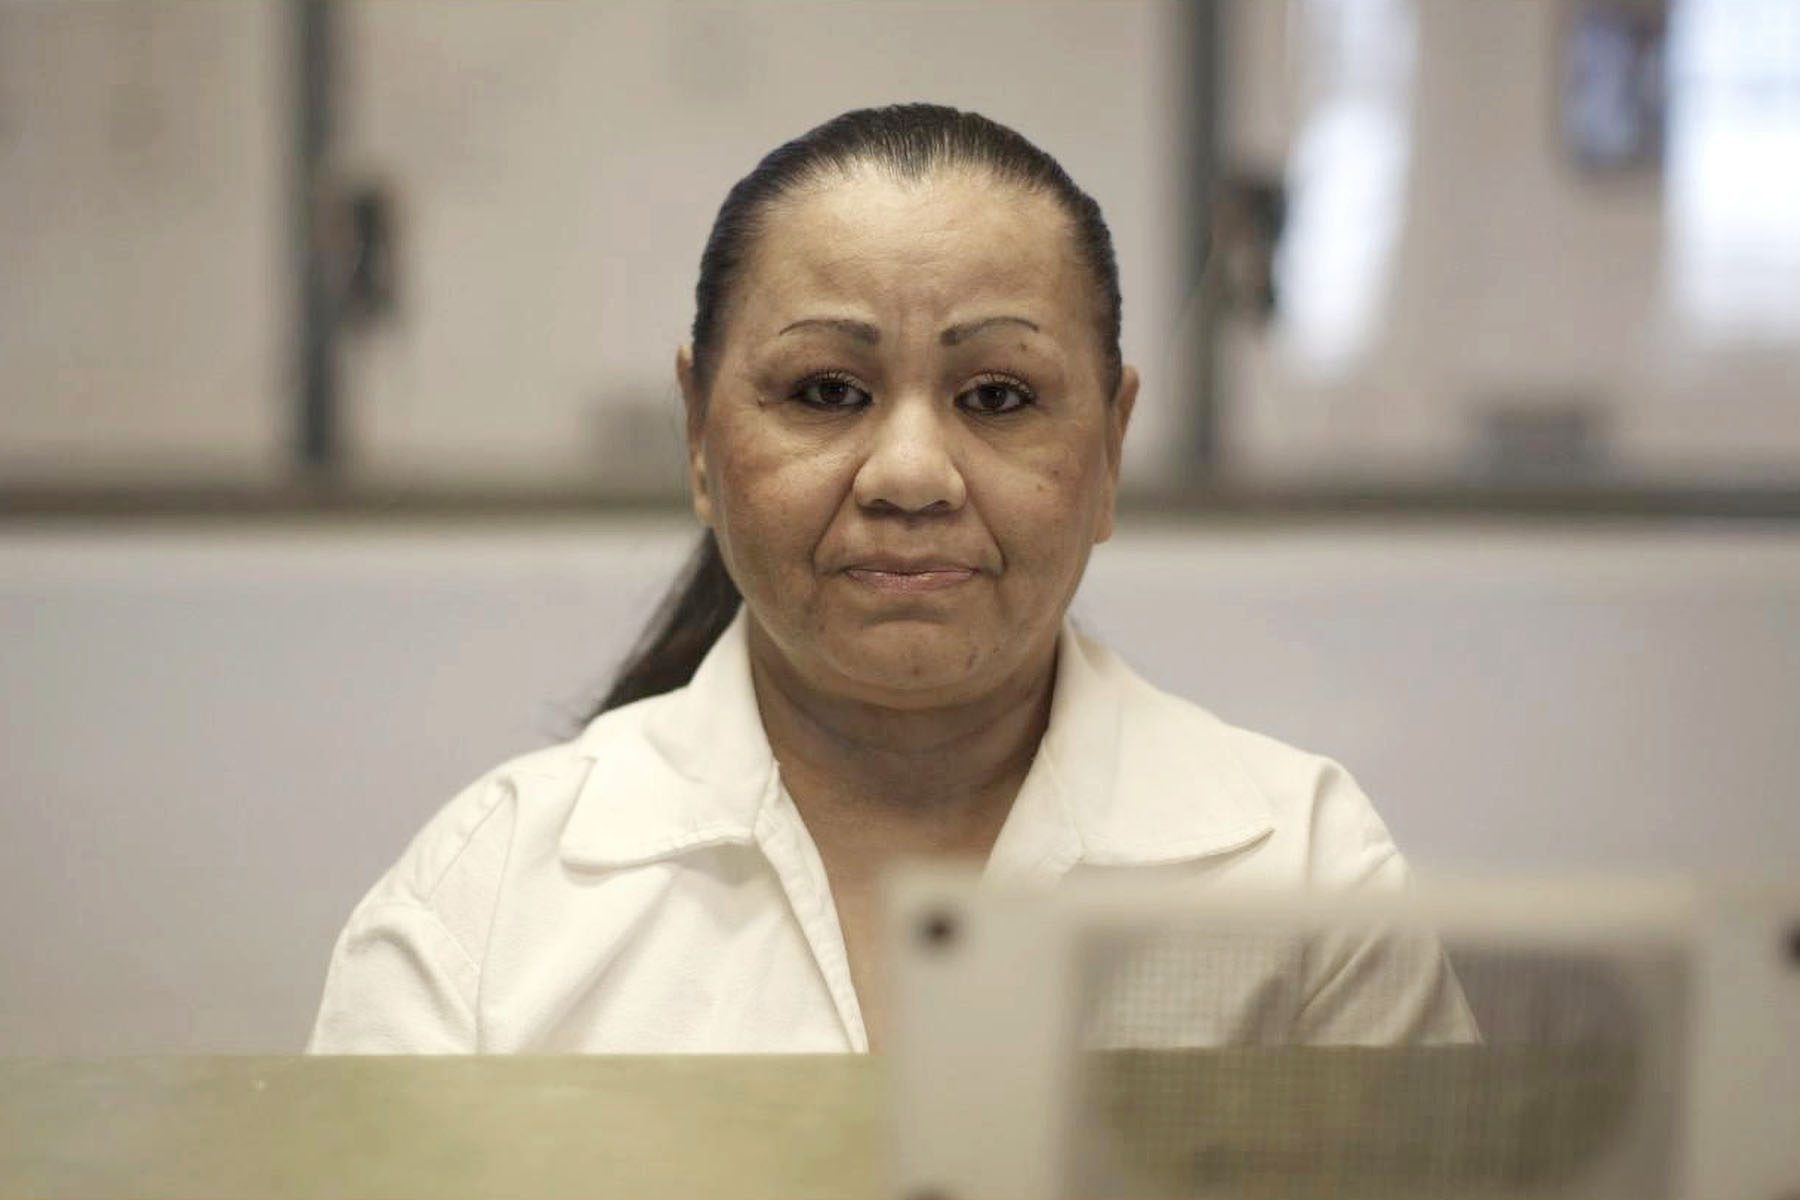 Portrait of Melissa Lucio in prison taken from the 2020 documentary film, "The State of Texas vs. Melissa."